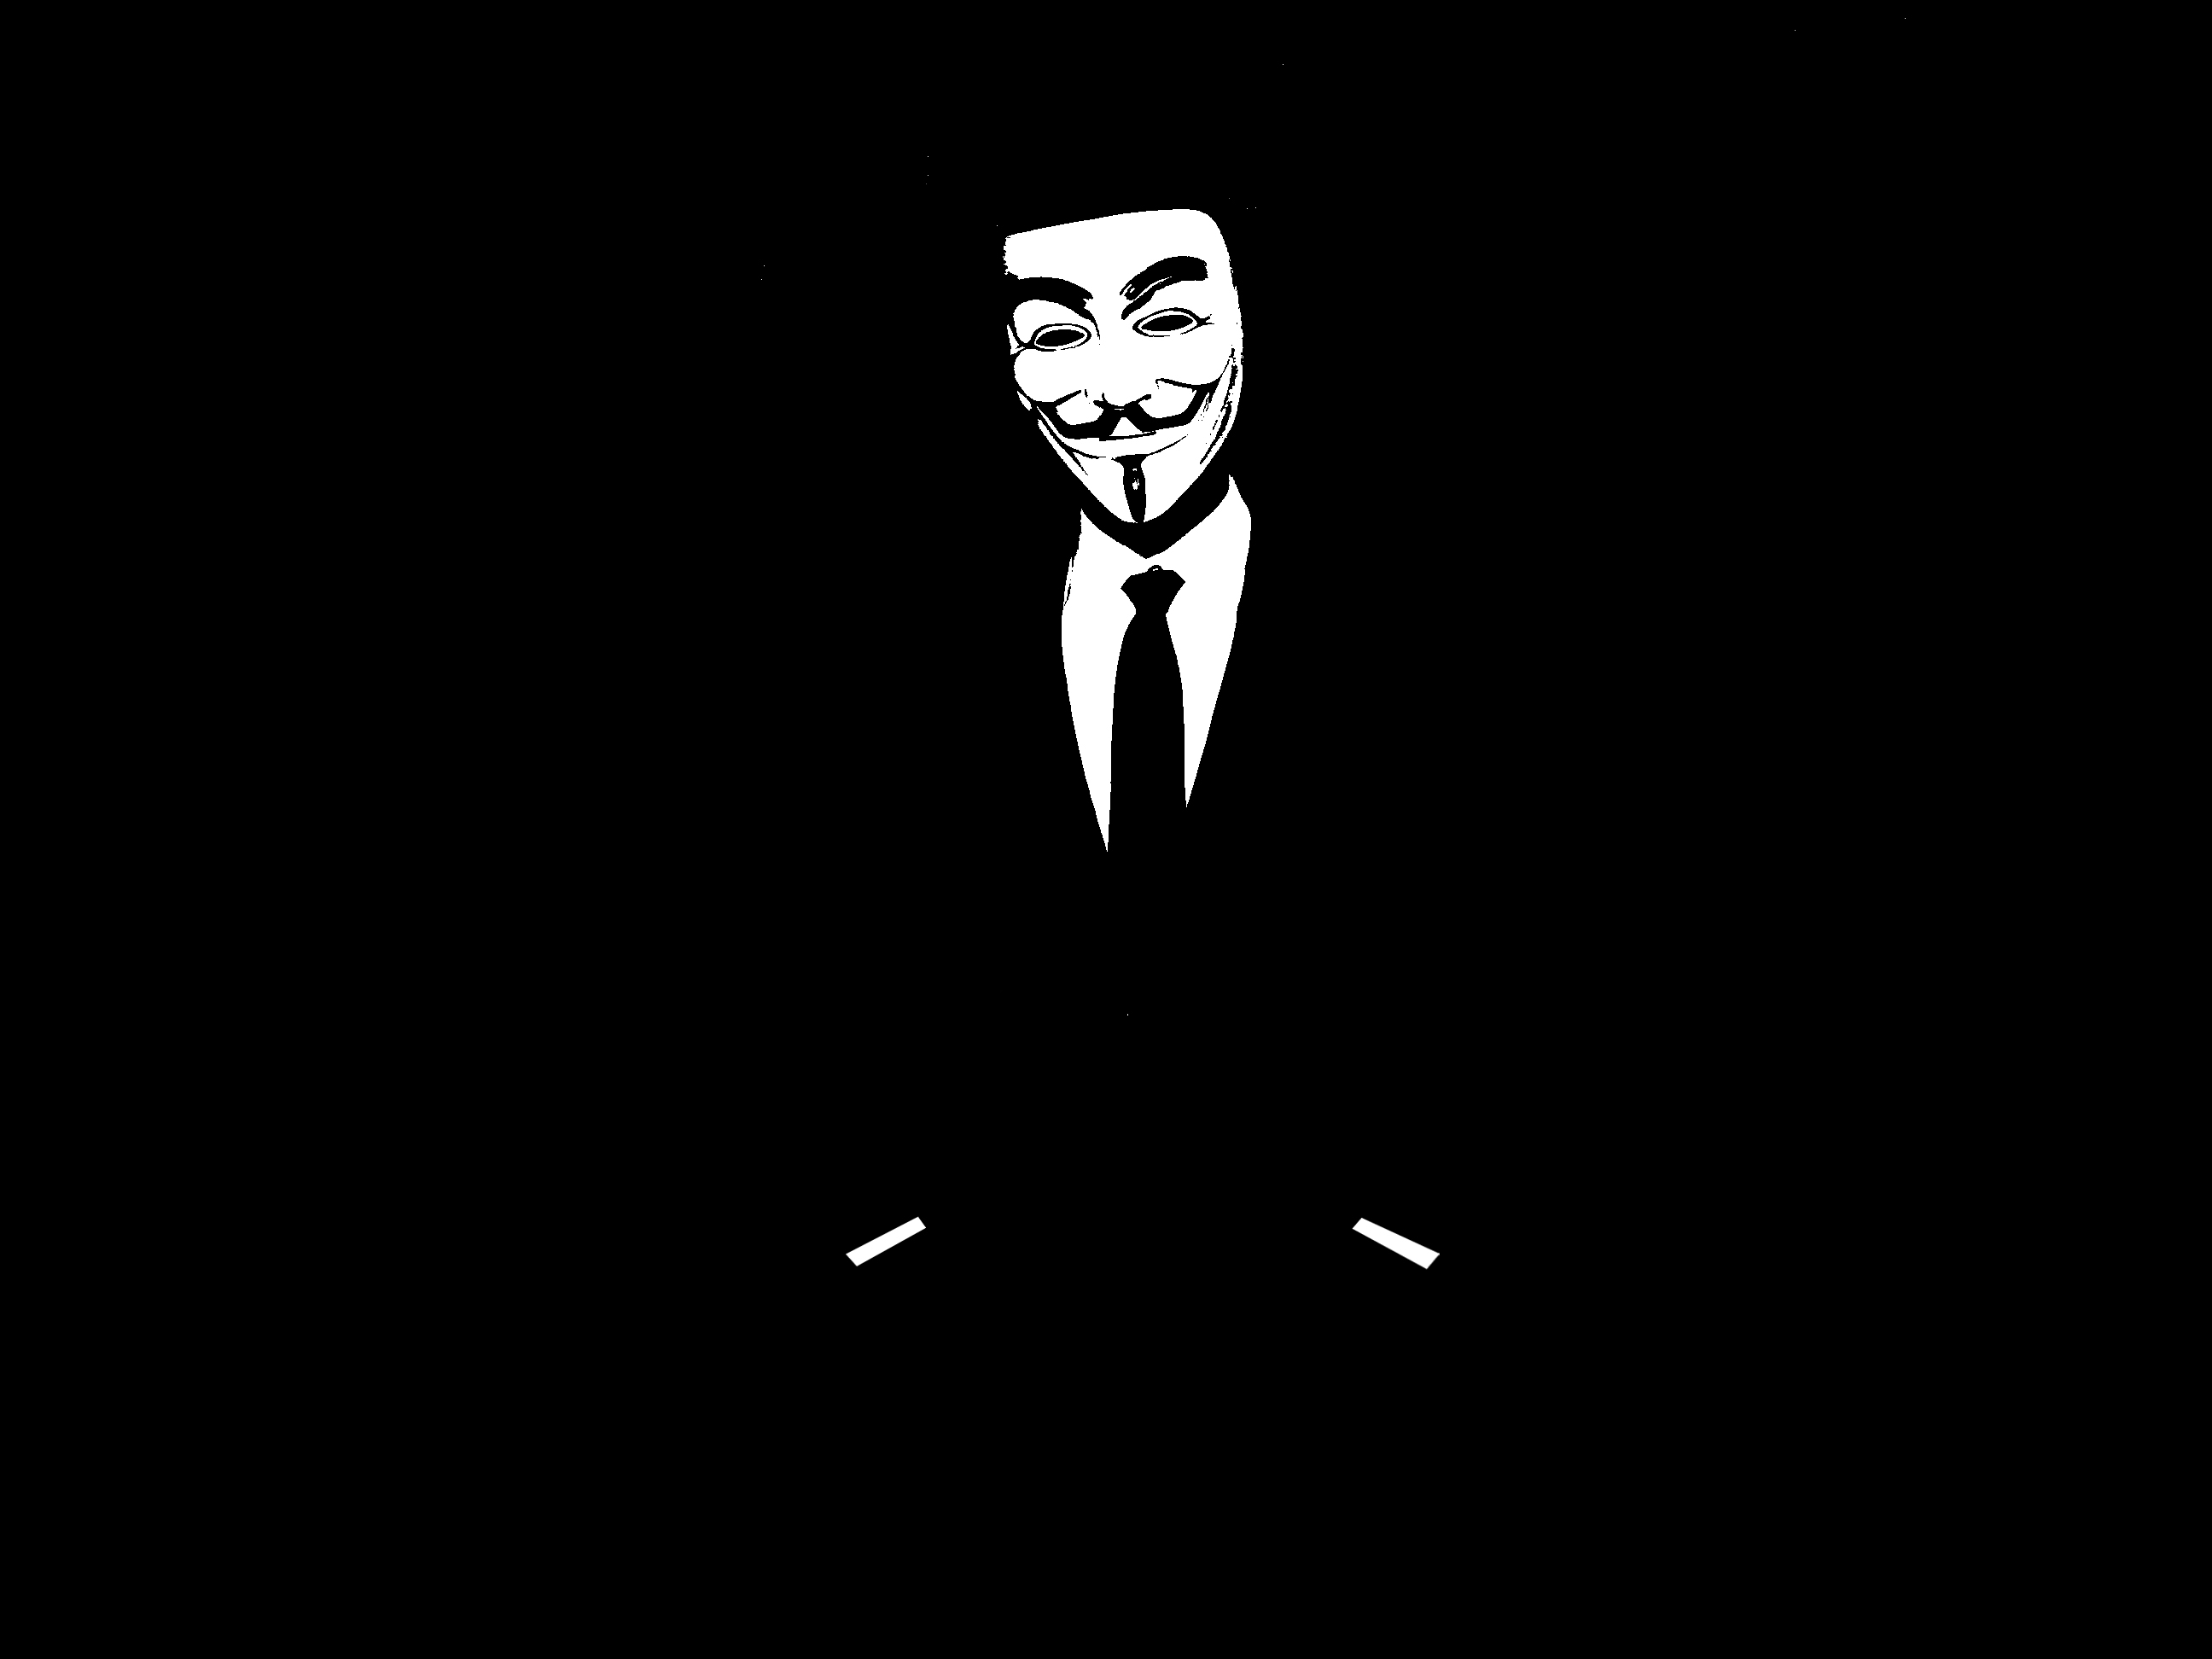 anonymous 2 wallpapers55com